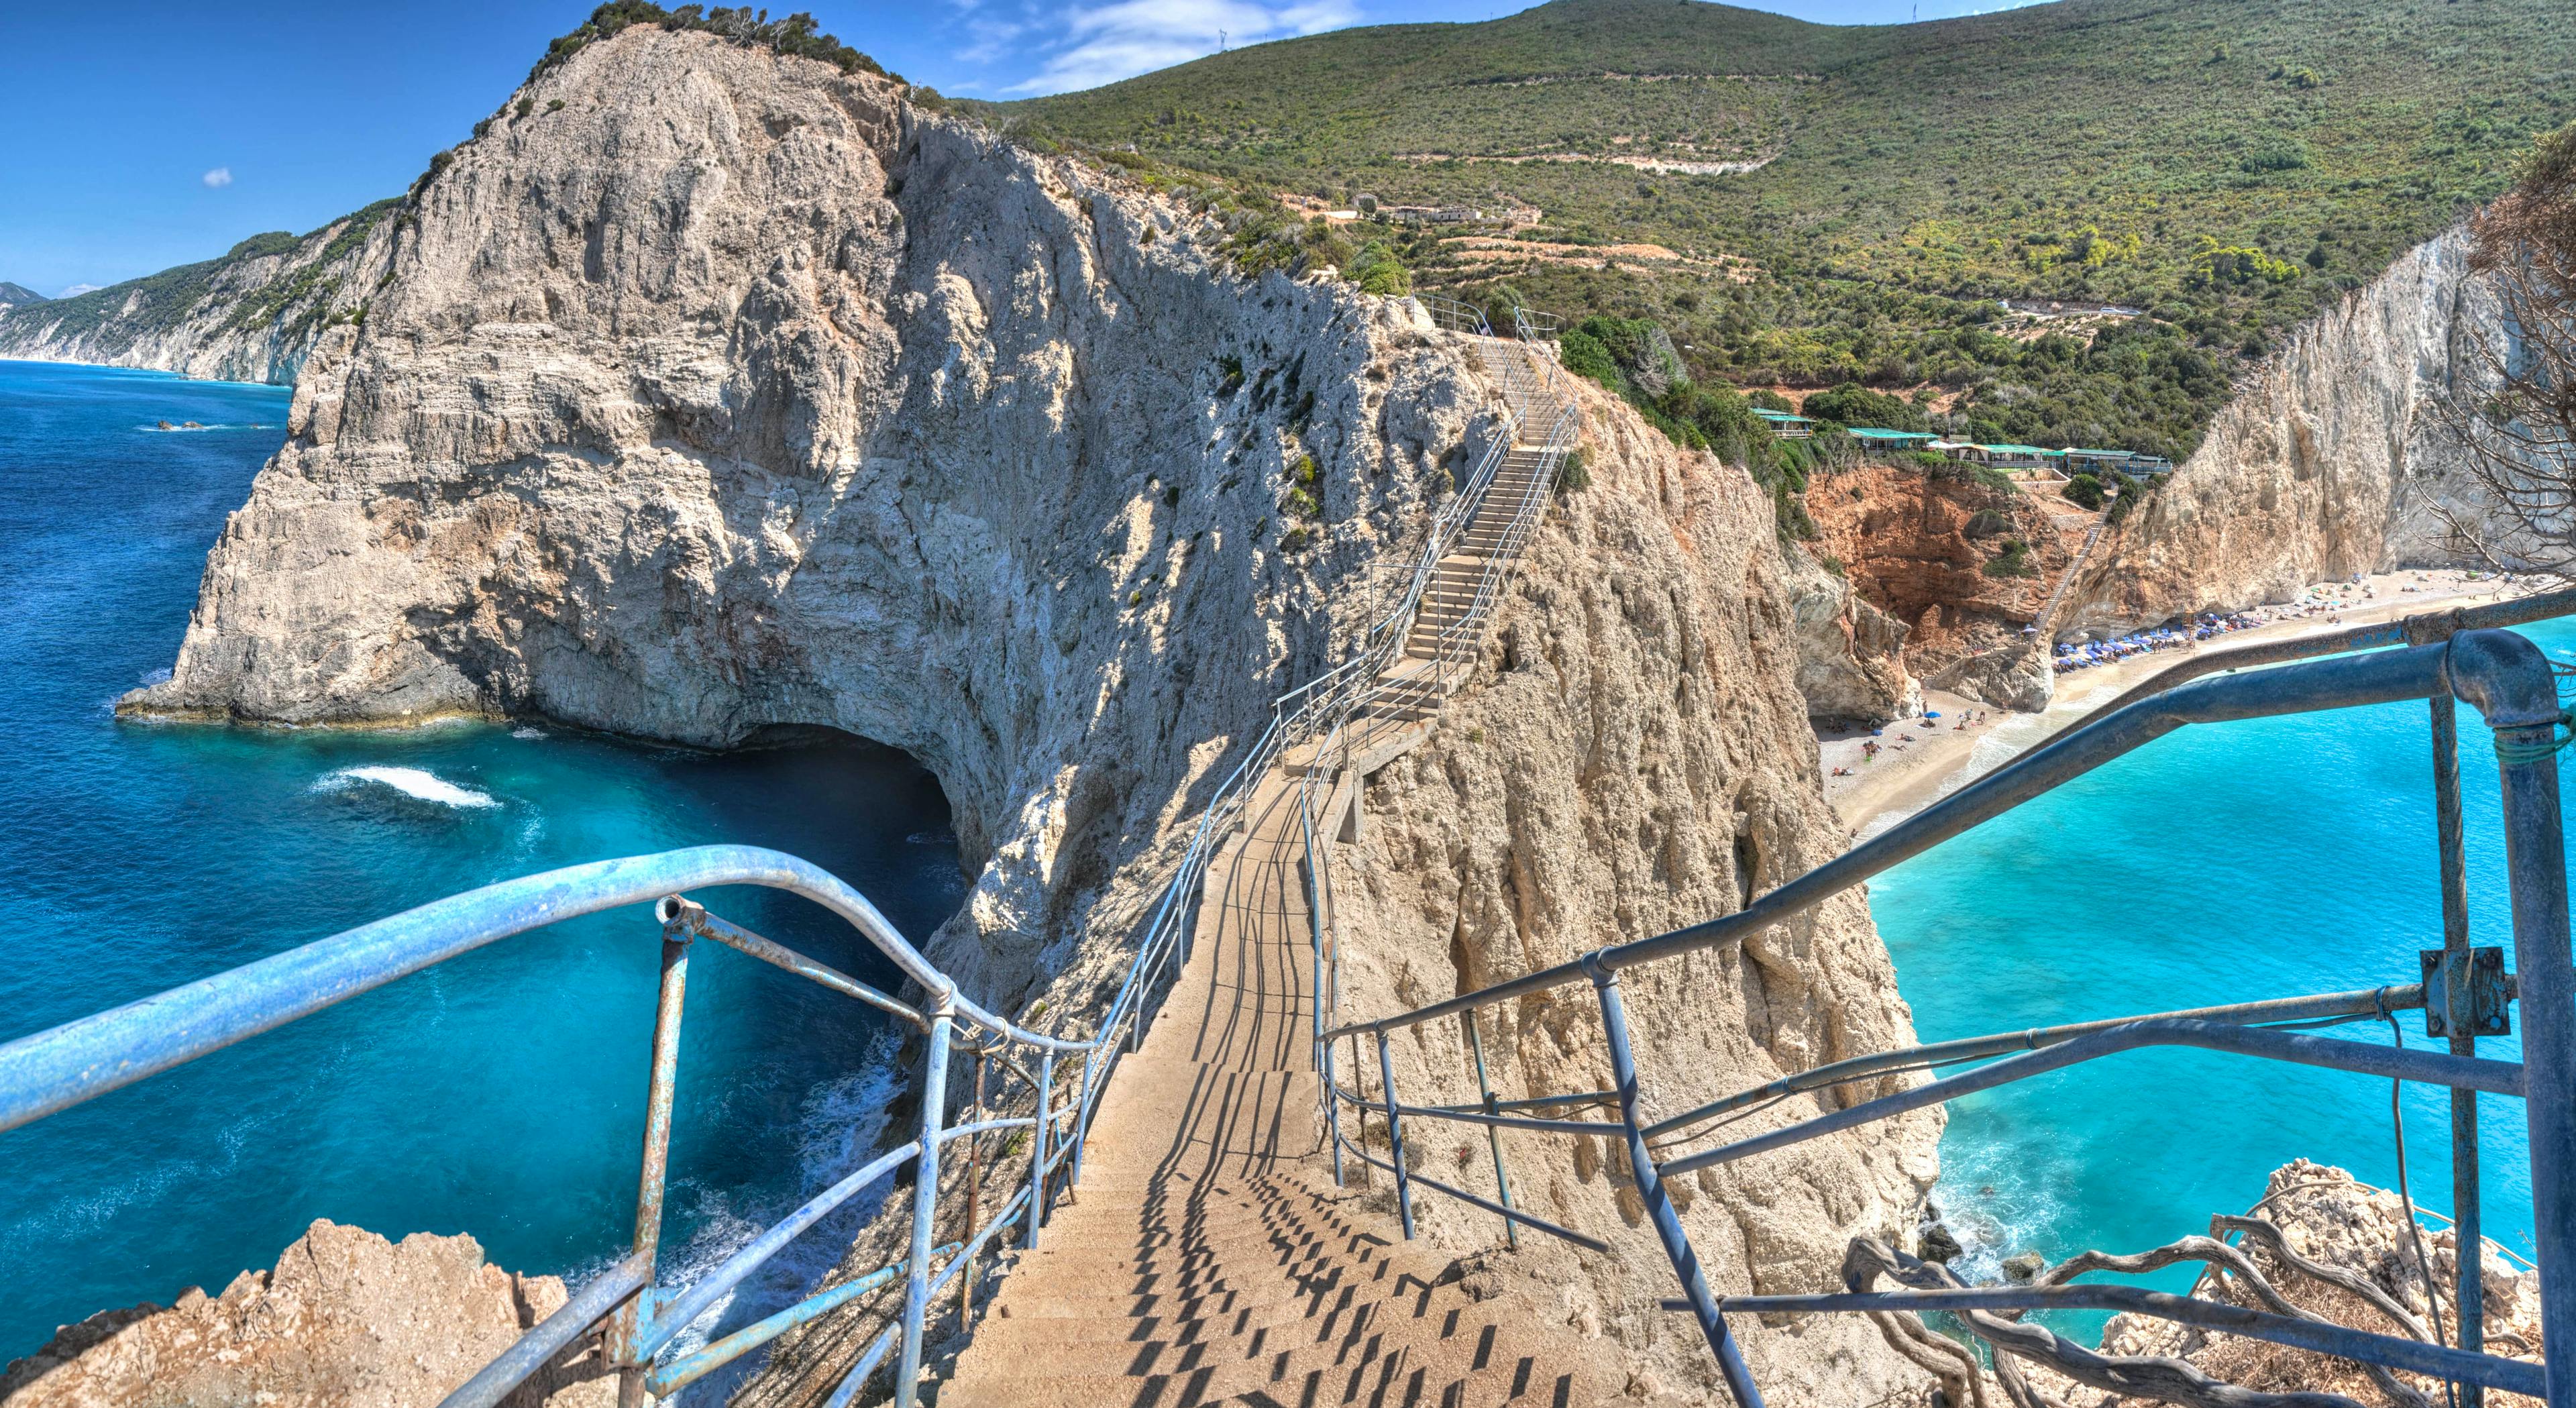 A Greek Island in the Ionian Sea: Sailing from Lefkas